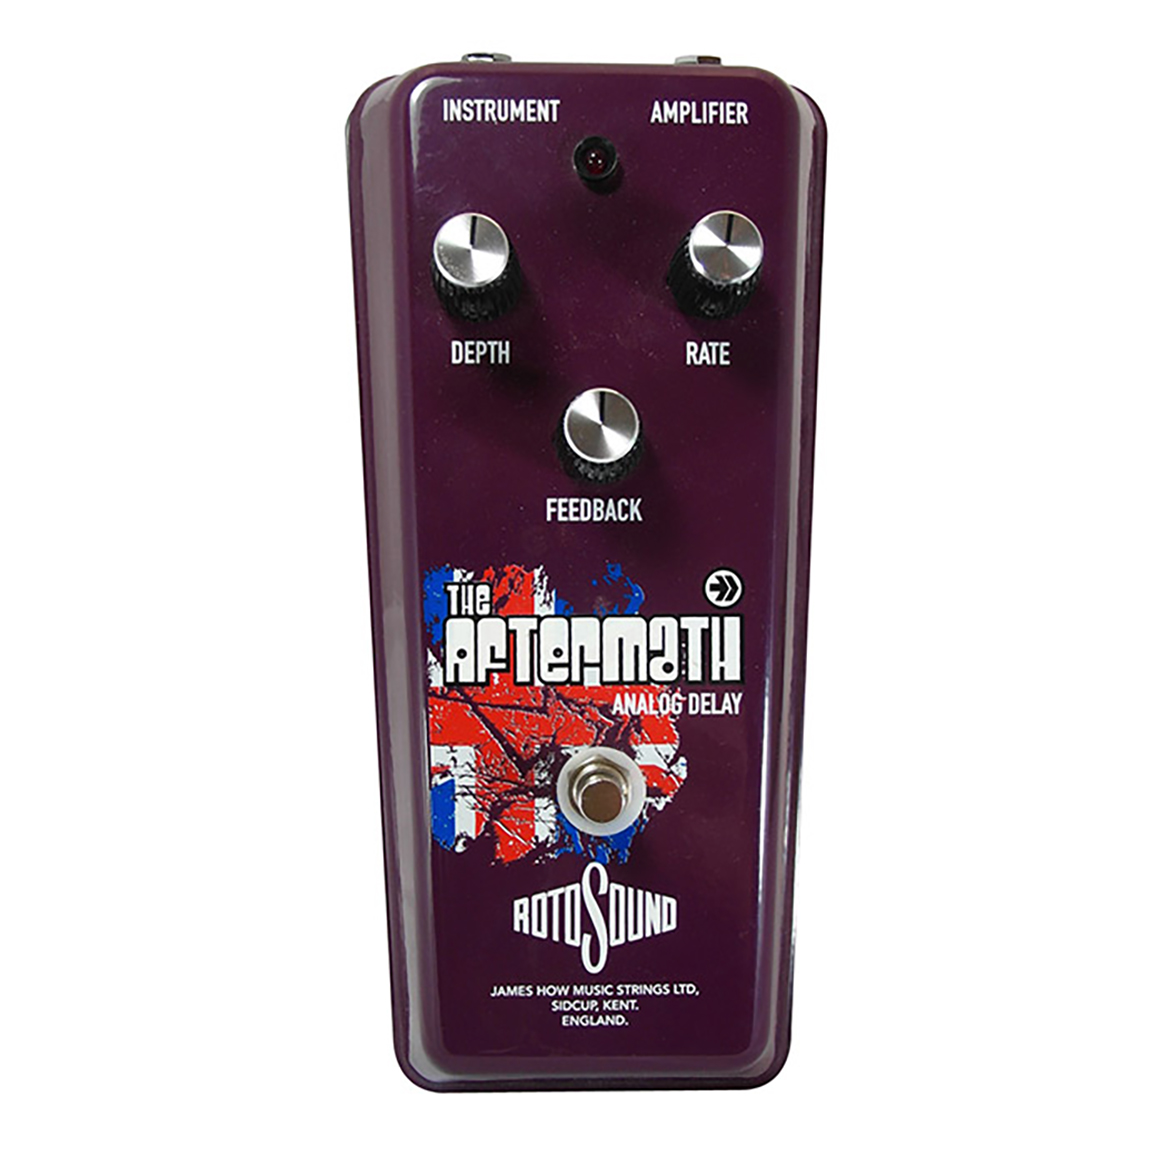 Rotosound Aftermath Analog Delay effects pedal